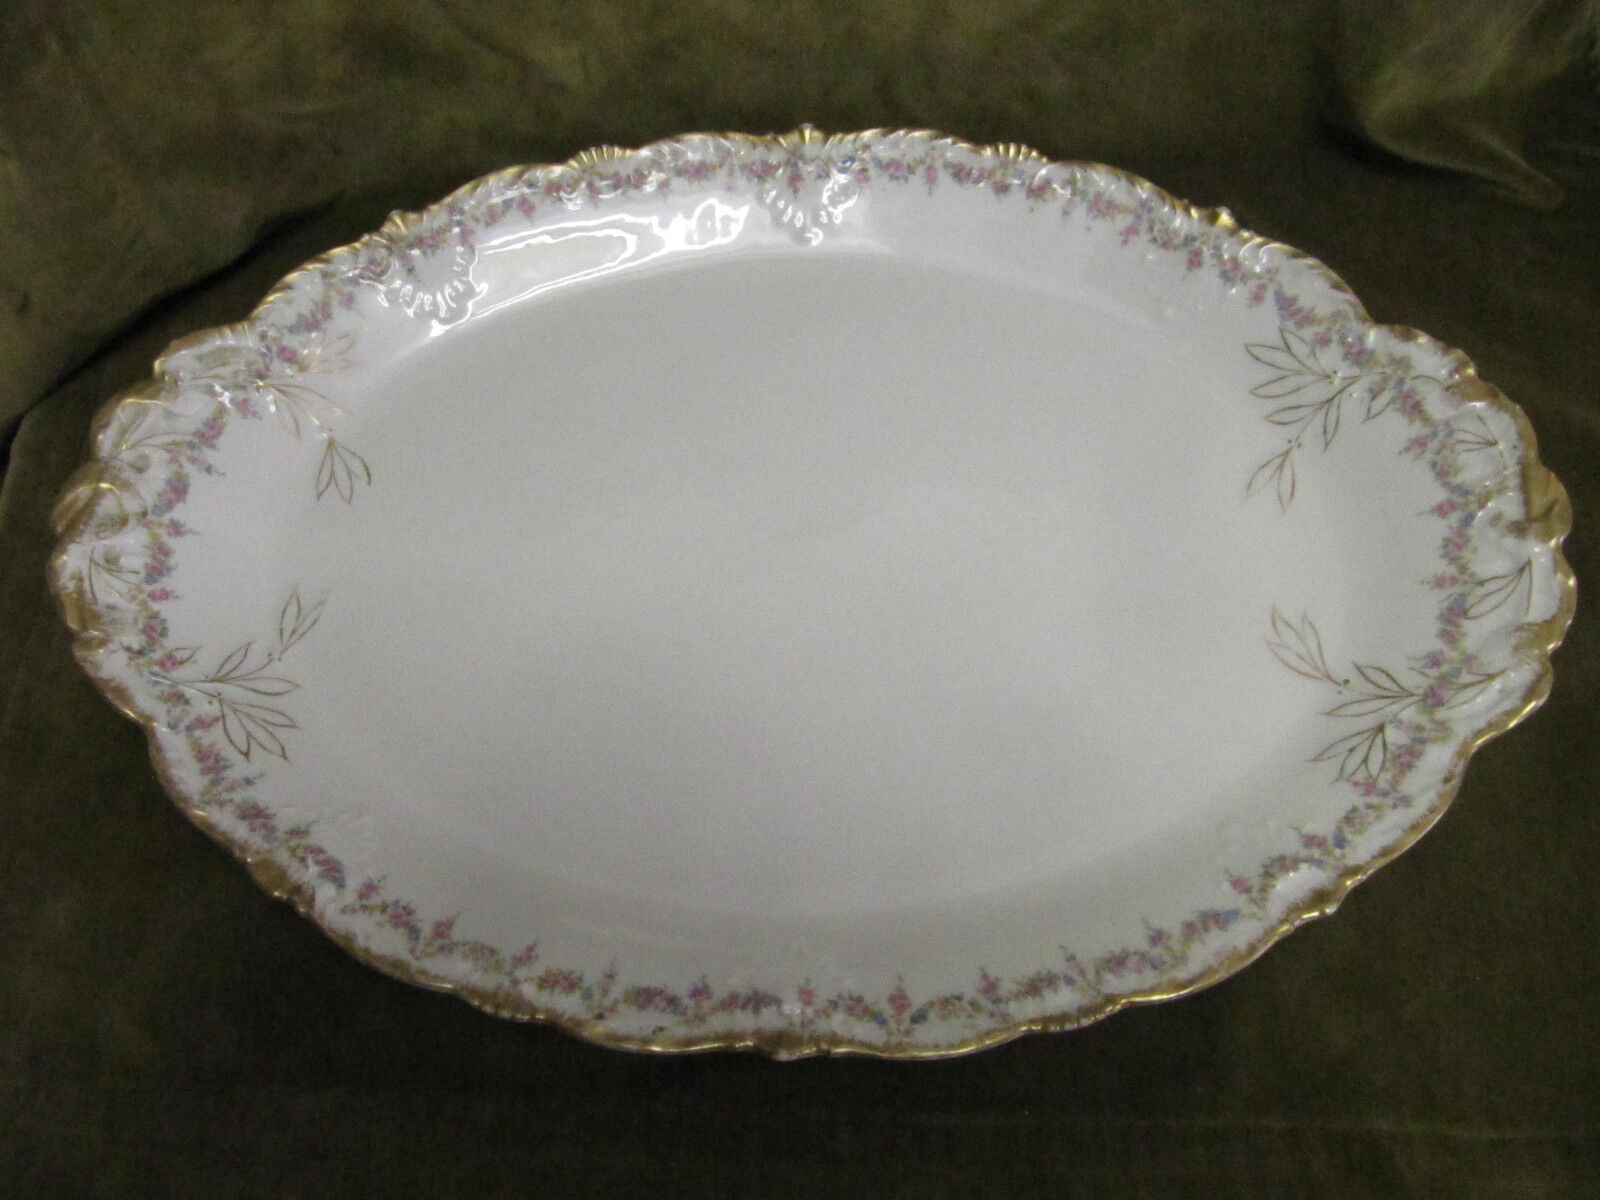 1900 french porcelain Limoges Theodore Haviland oval serving tray Louis XVI st